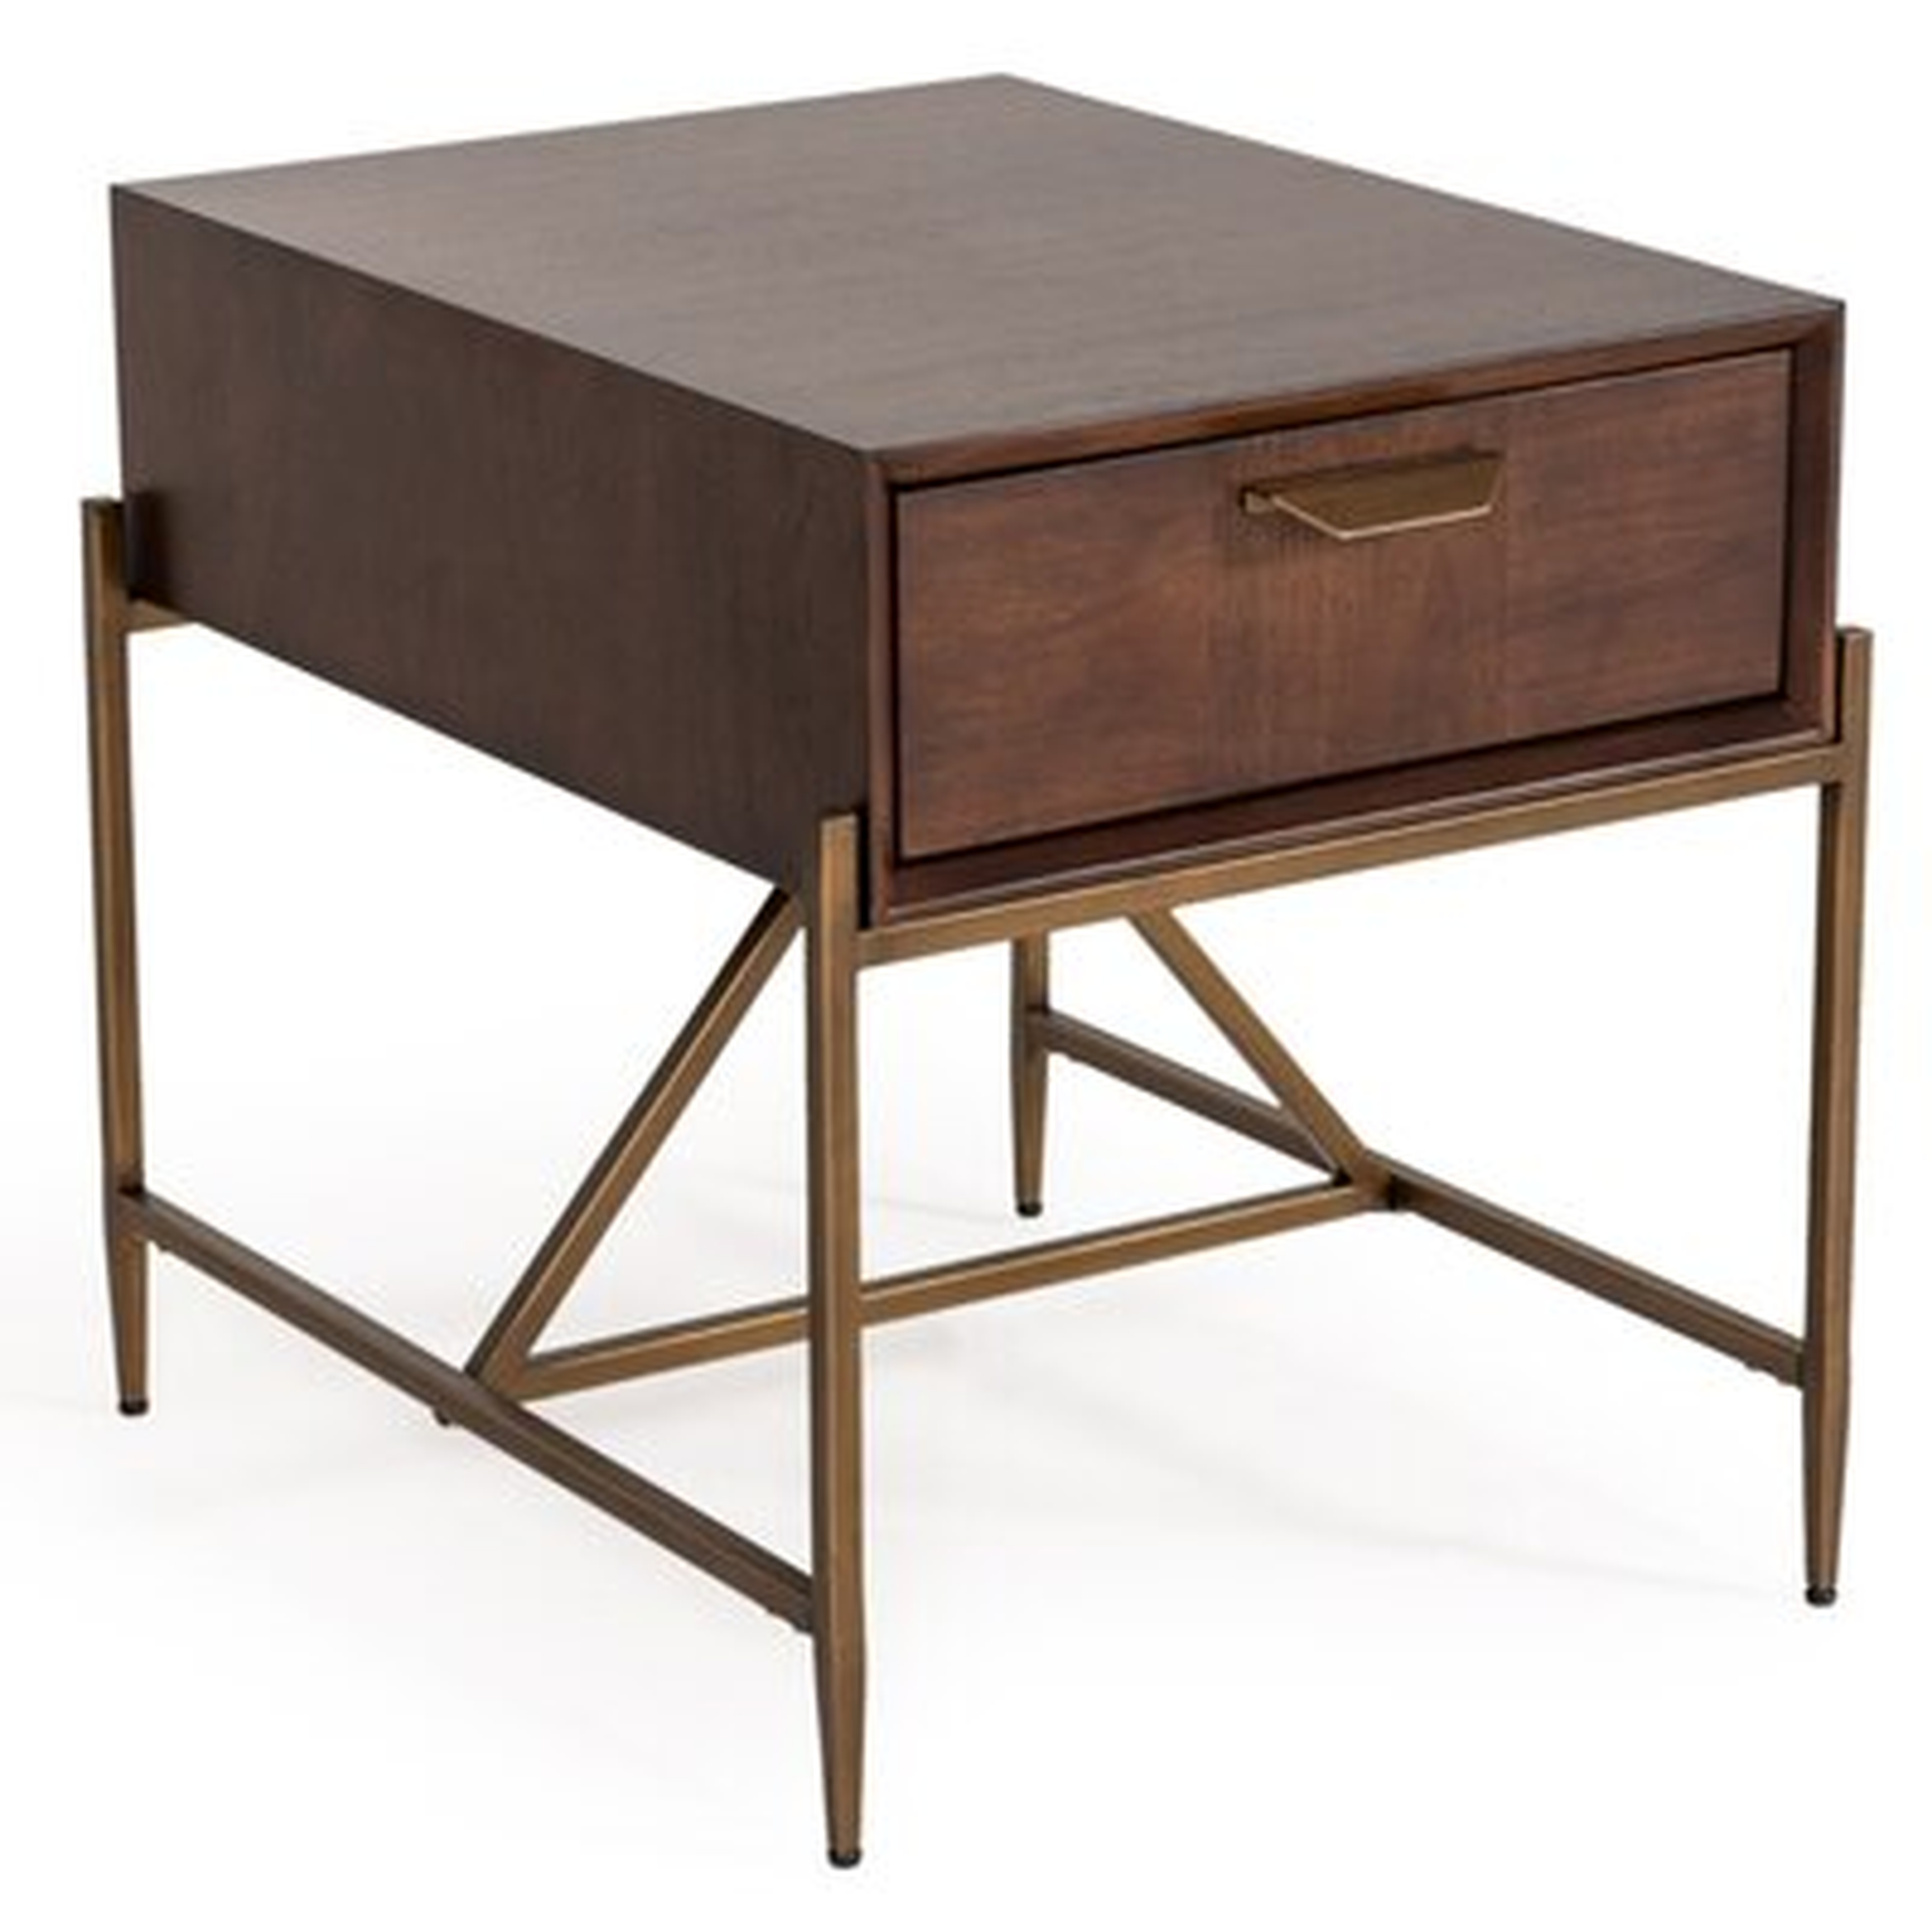 Albaugh End Table with Storage - Wayfair